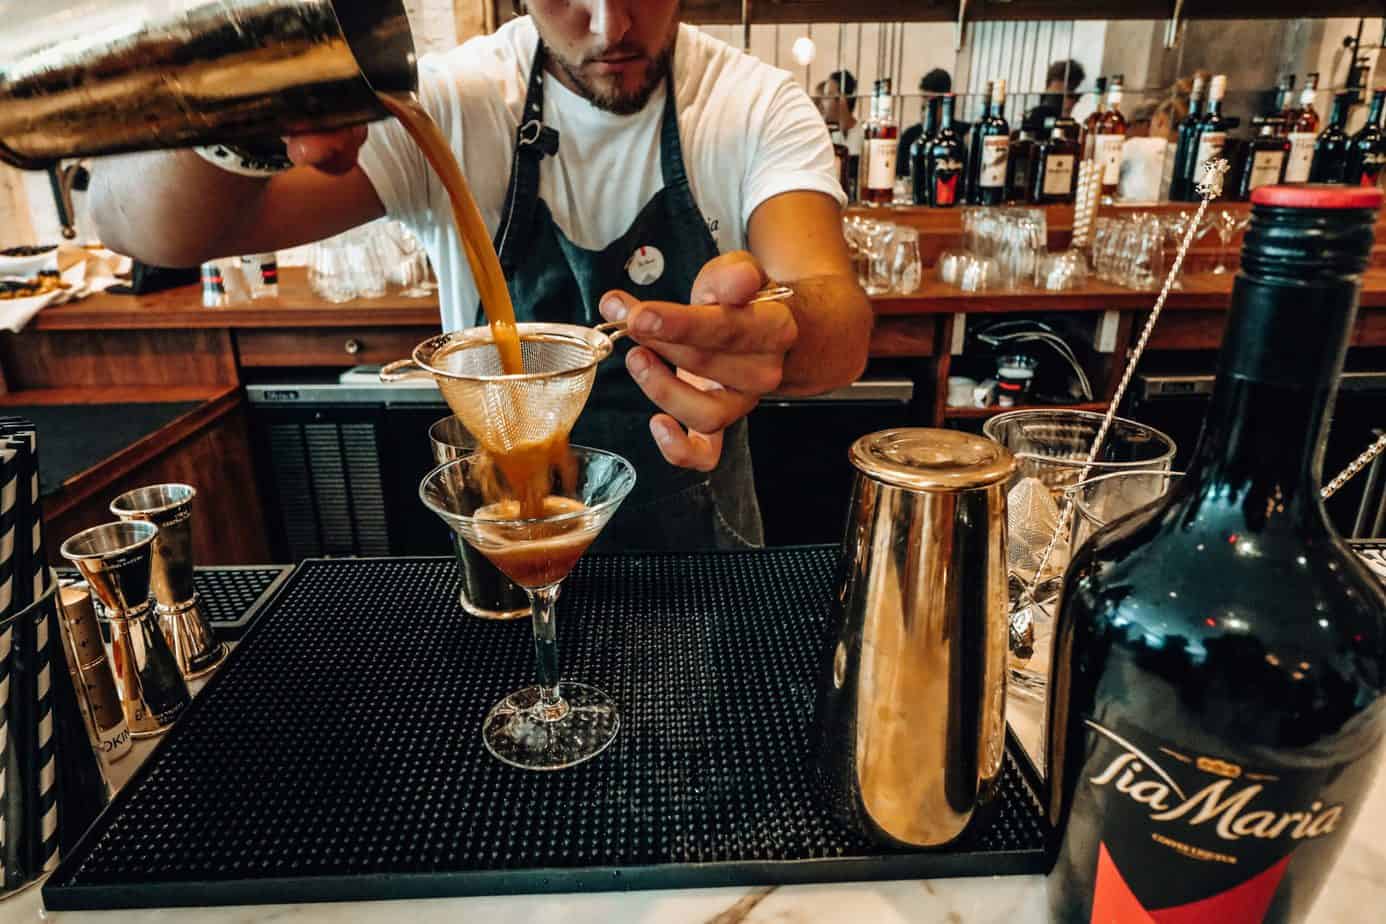 Tales of the cocktail coffee culture